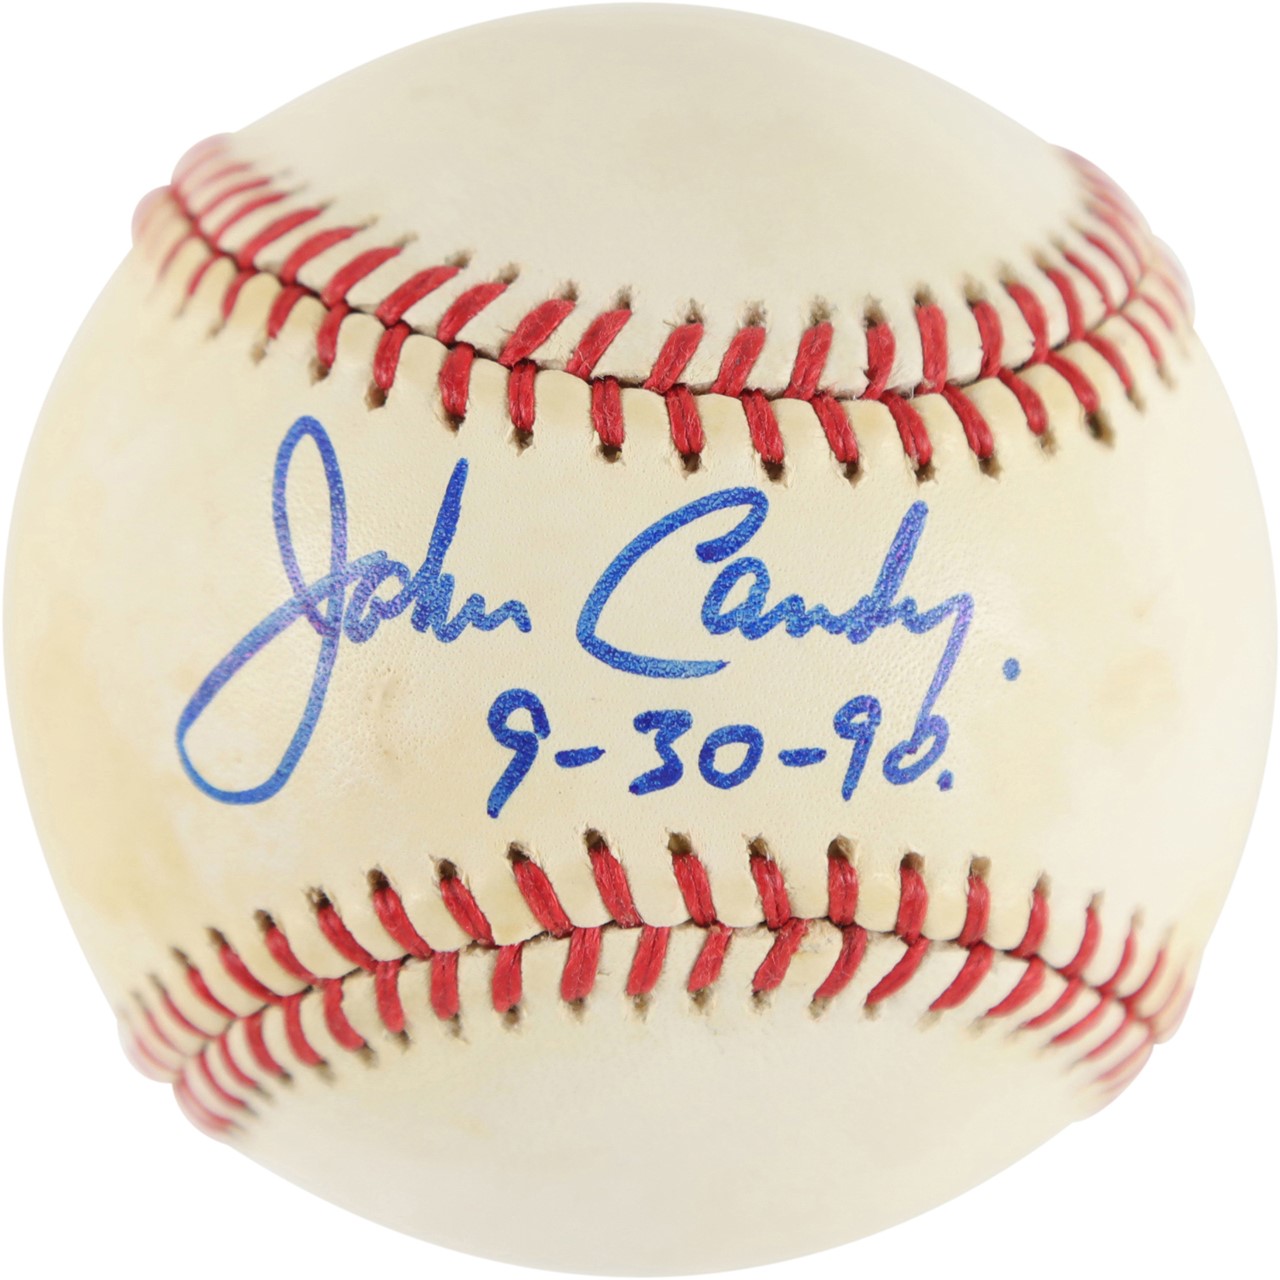 - 9/30/90 John Candy Single-Signed Baseball Obtained in Person by MLB Scout at White Sox Game (PSA)